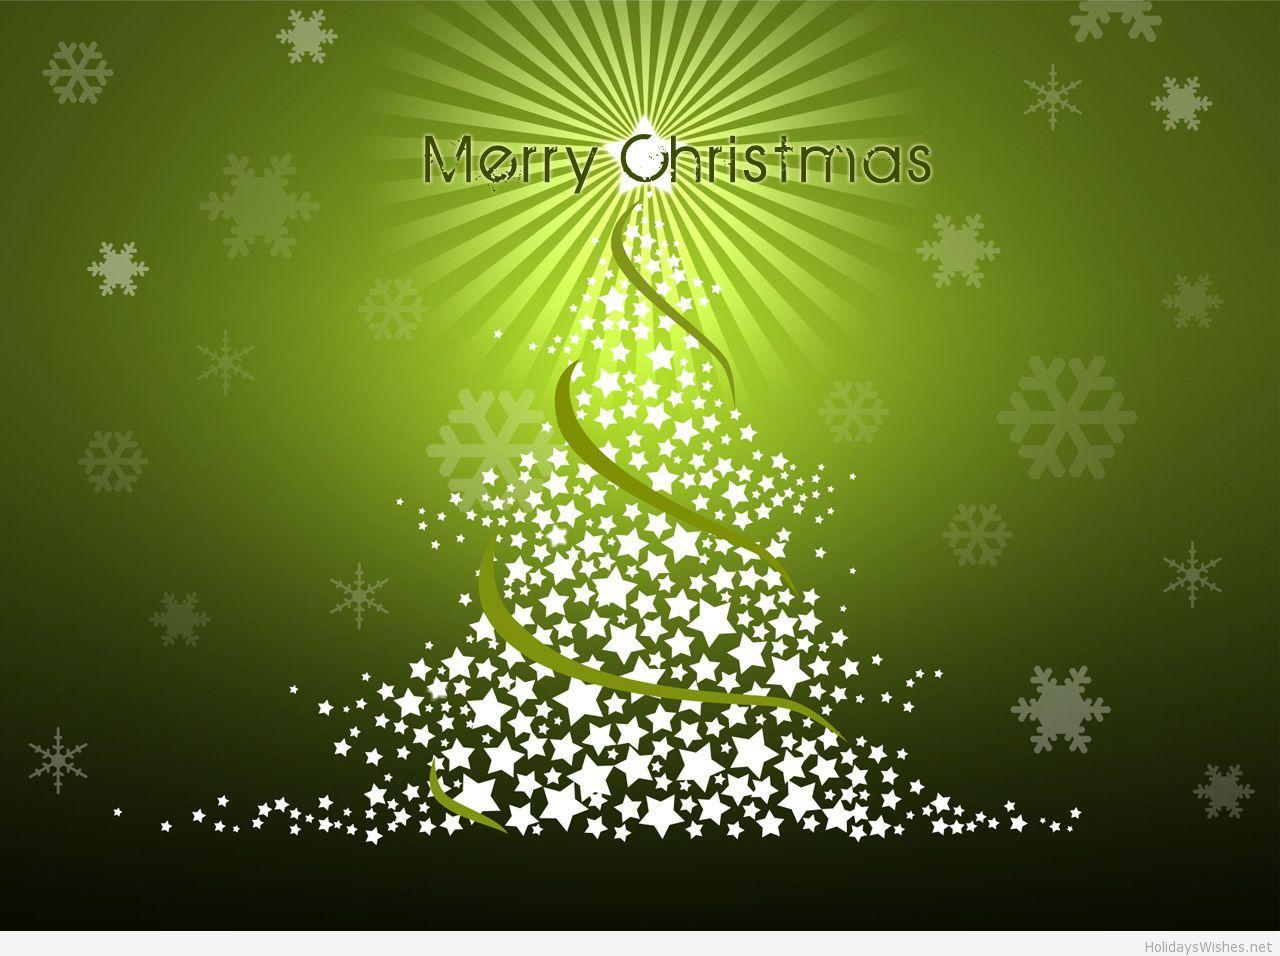 Awesome Merry Christmas green wallpaper for you special